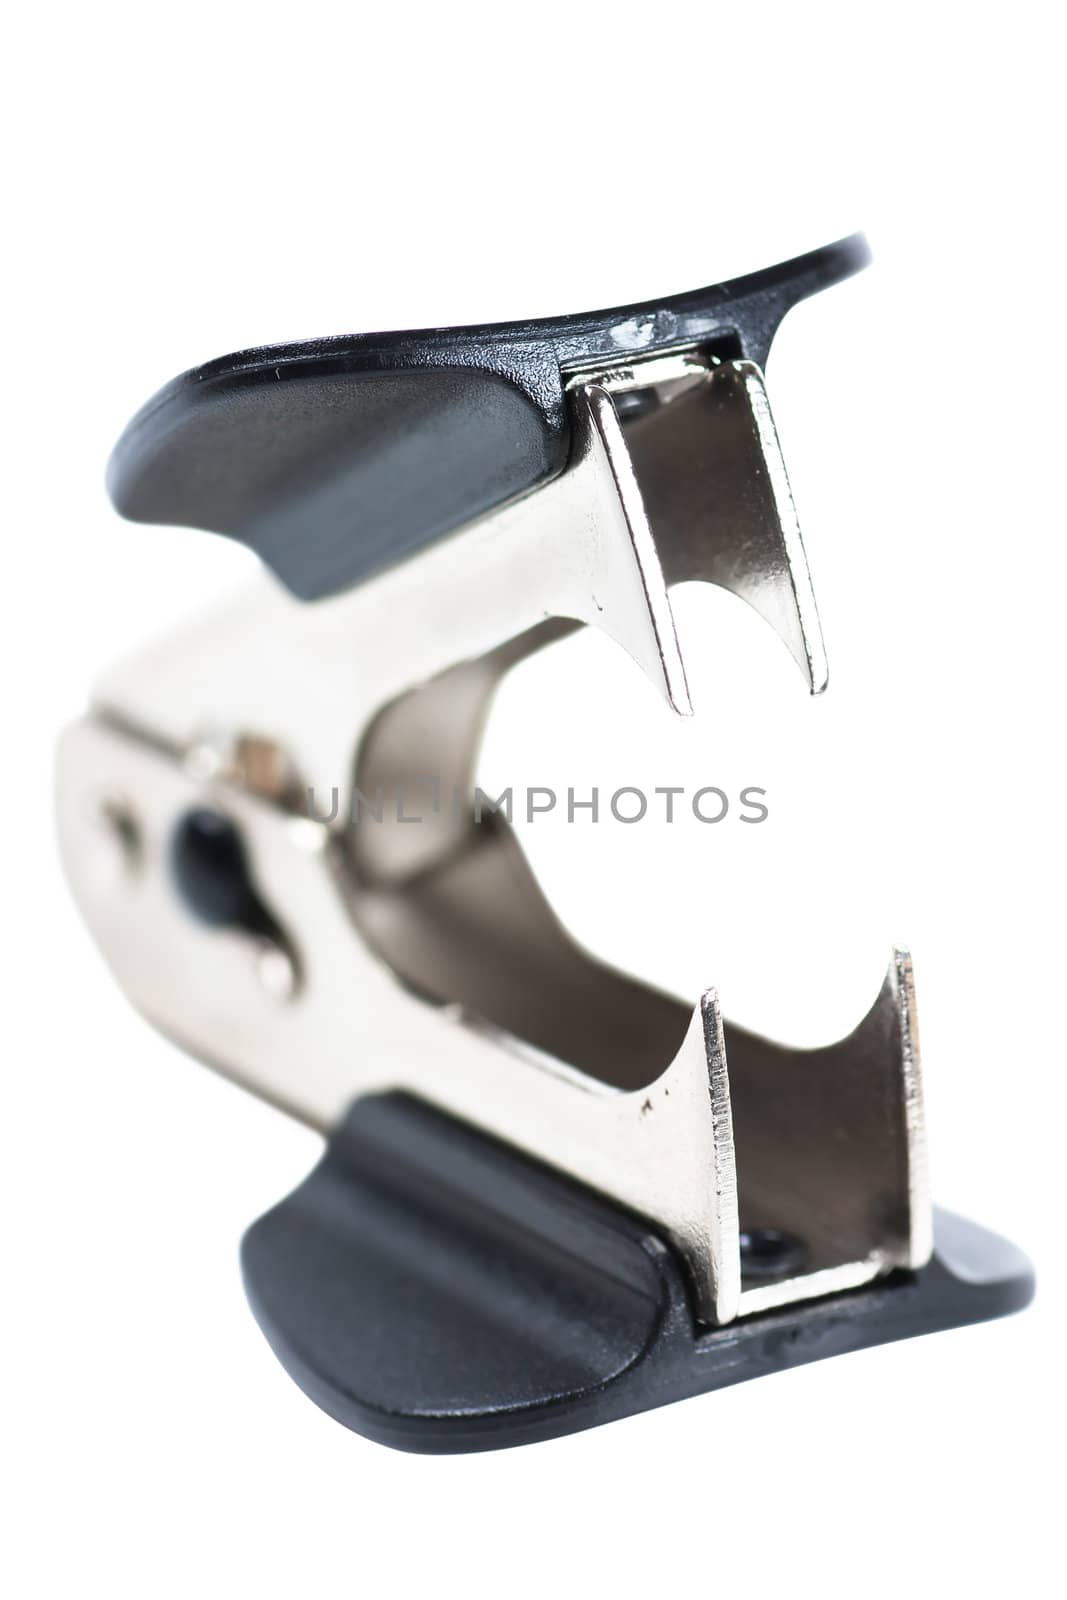 Staple remover by AGorohov